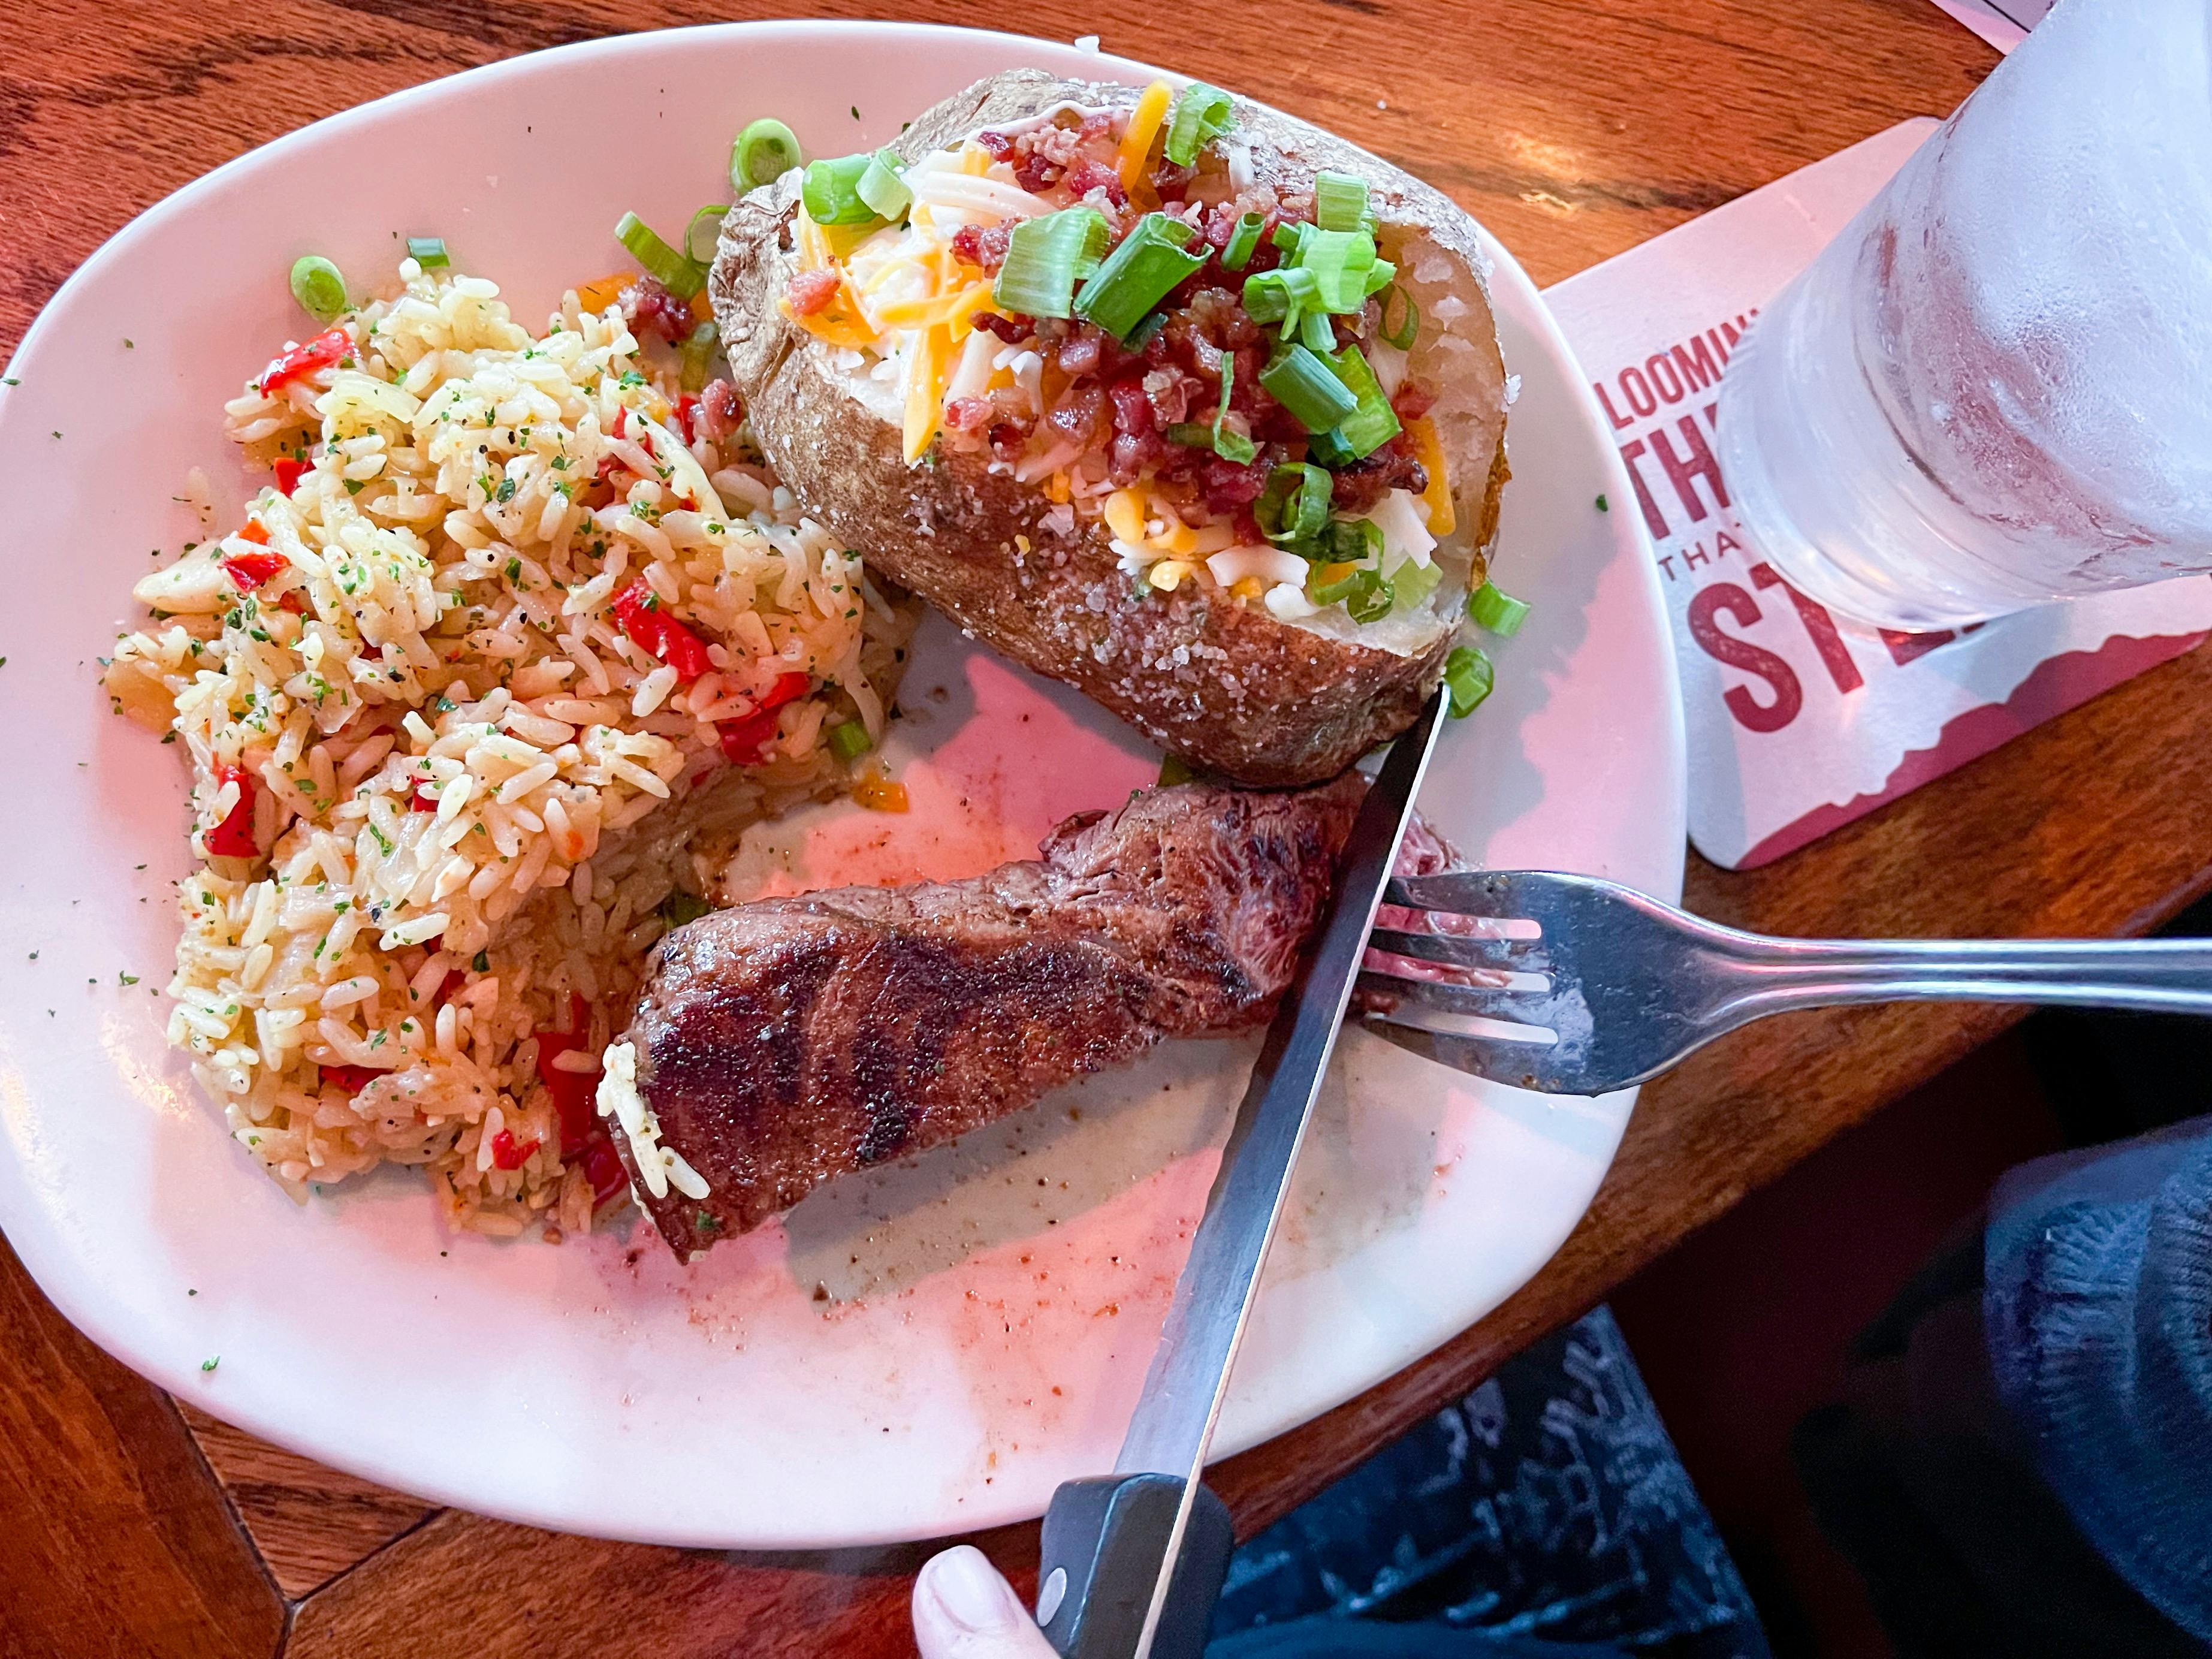 Someone using a fork and knife to cut into a steak on a plate with rice and a loaded baked potato at Outback Steakhouse.